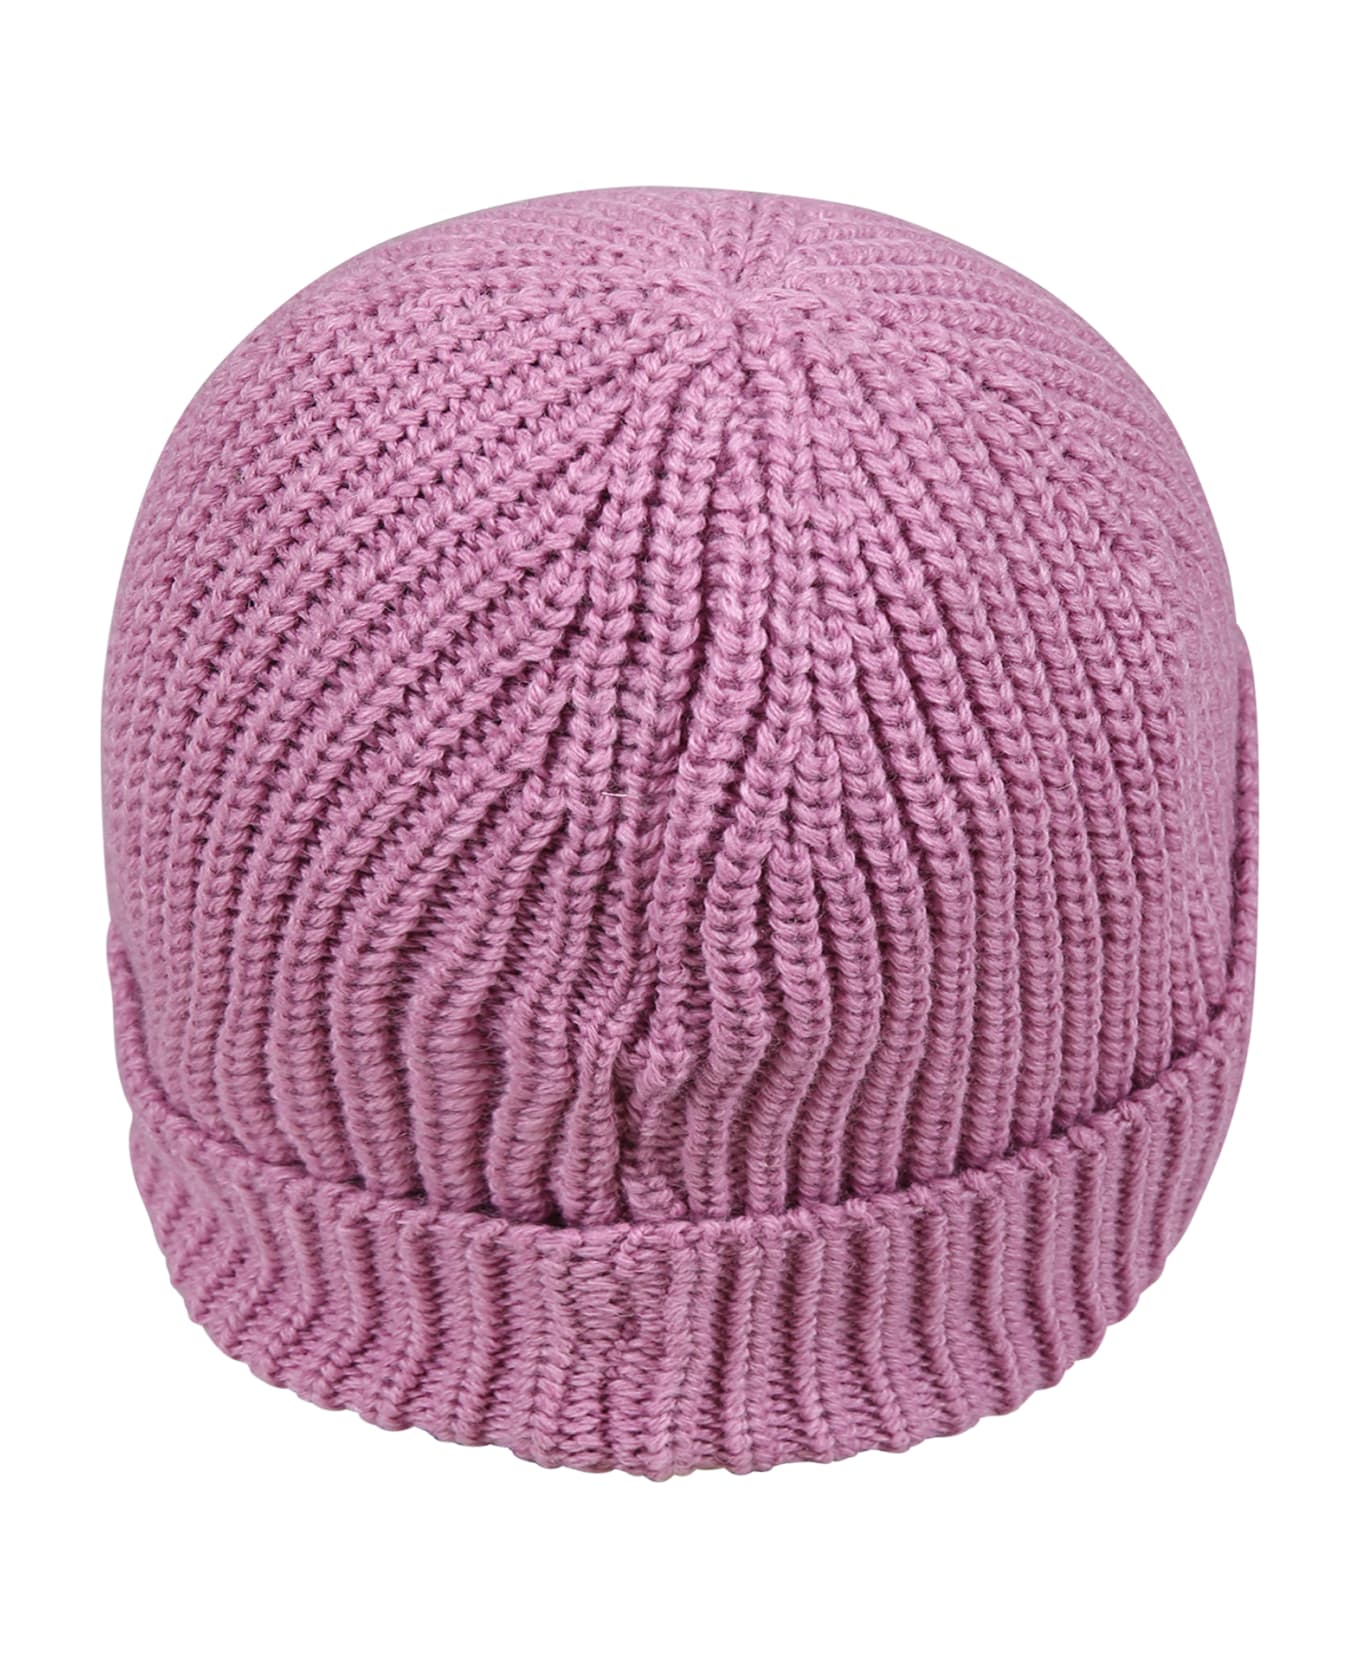 Barrow Pink Hat For Kids With Smiley - Pink Lavander